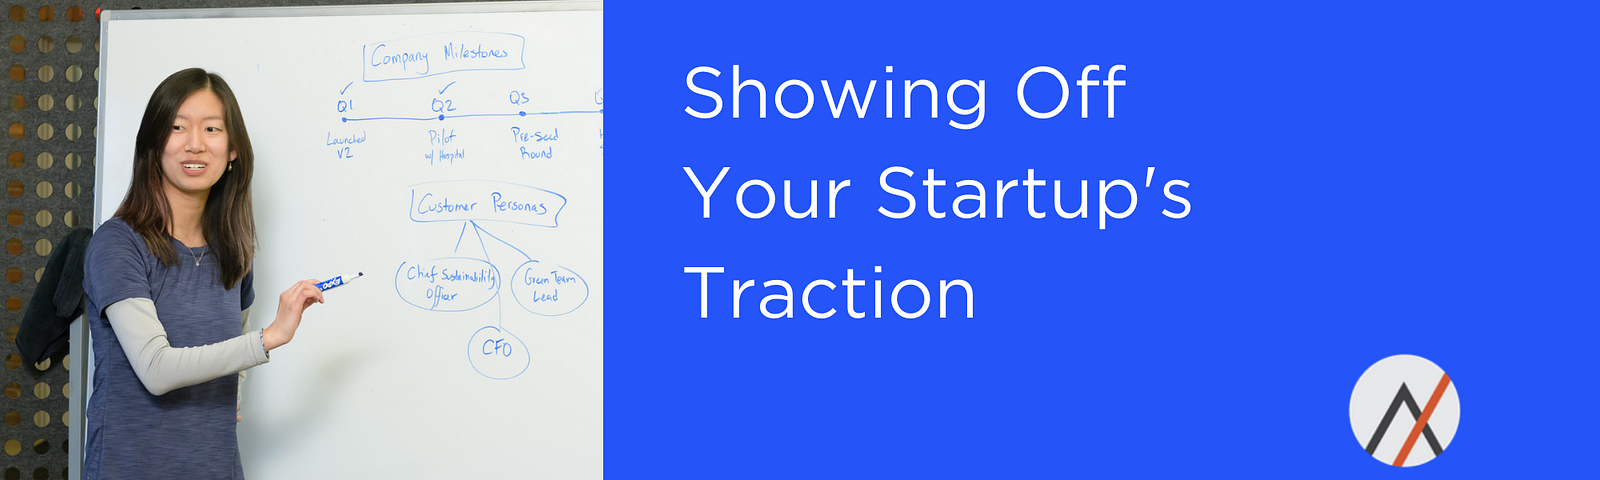 Showing Off Your Startup’s Traction